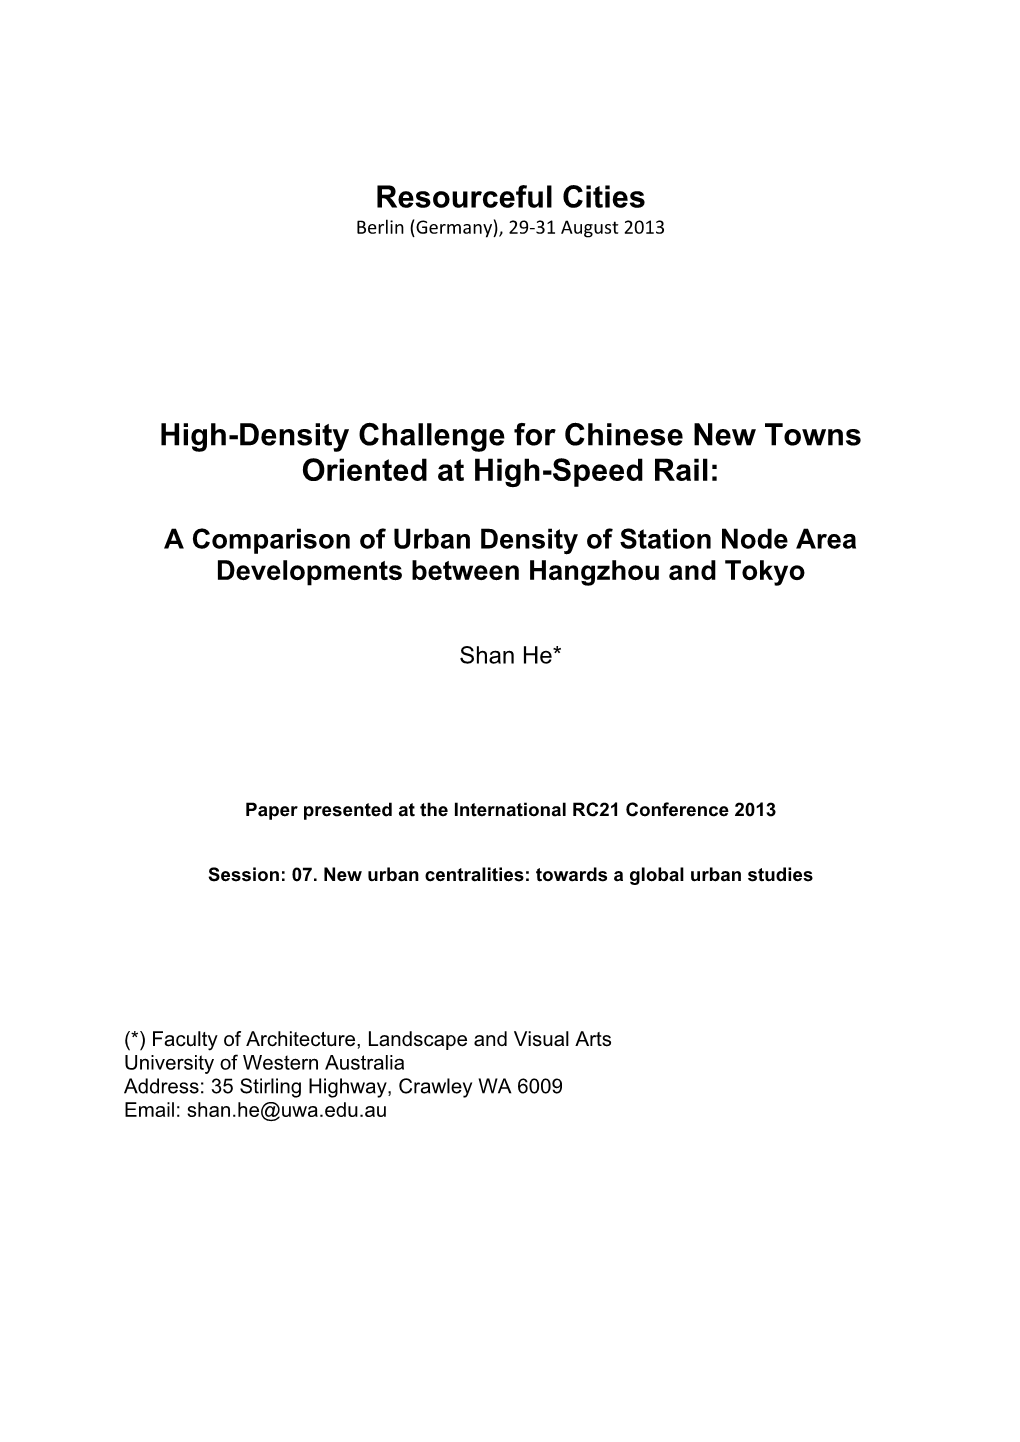 Resourceful Cities High-Density Challenge for Chinese New